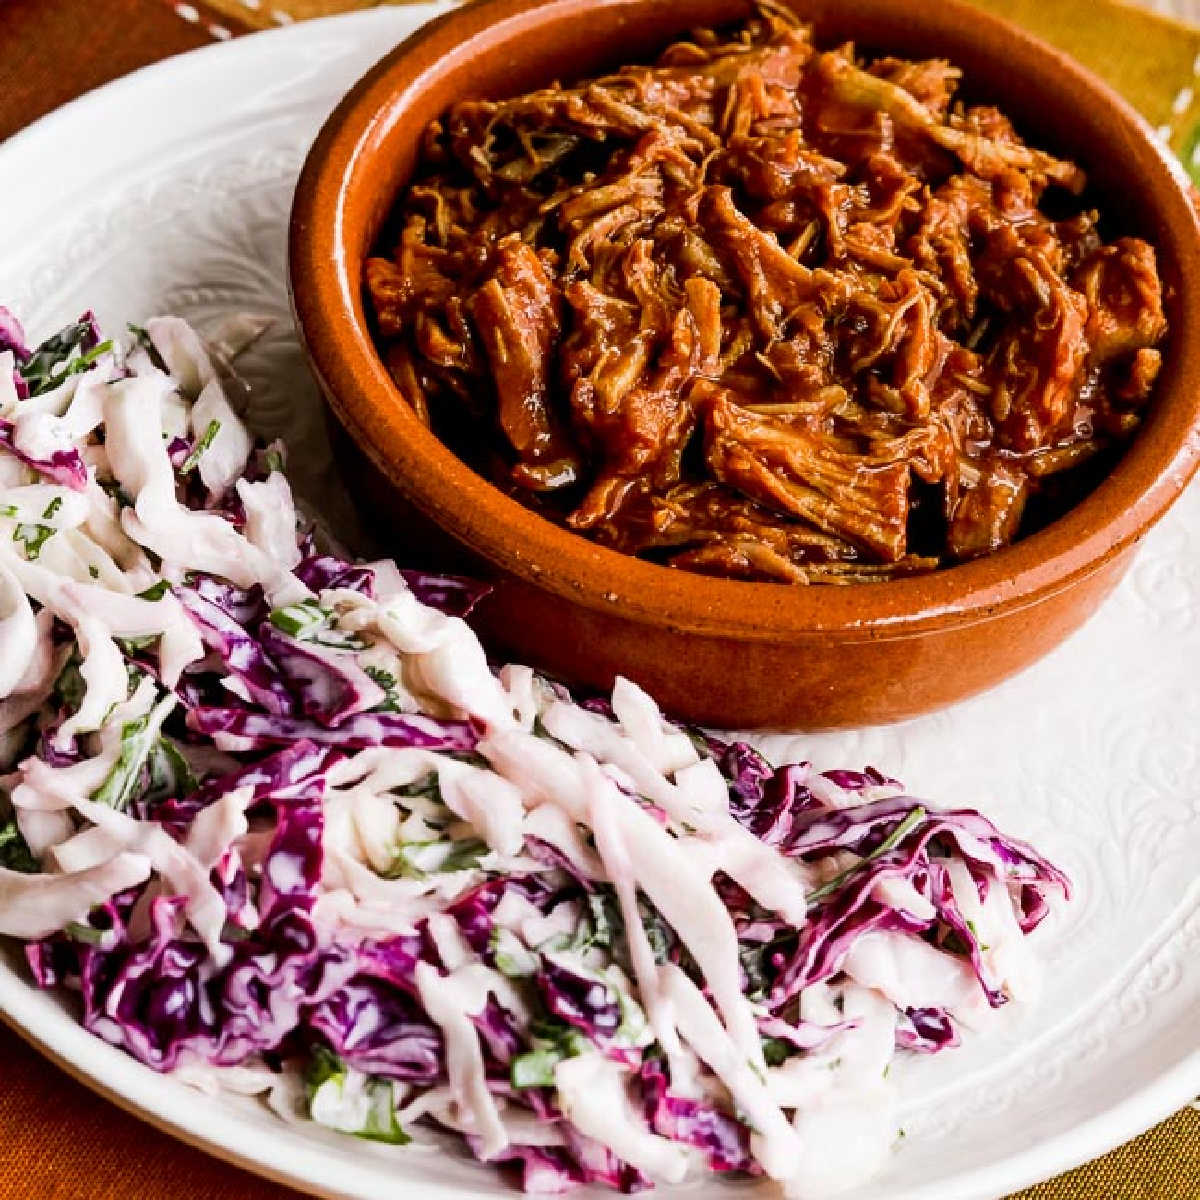 A plate of low-carb slow-cooker pulled pork with coleslaw